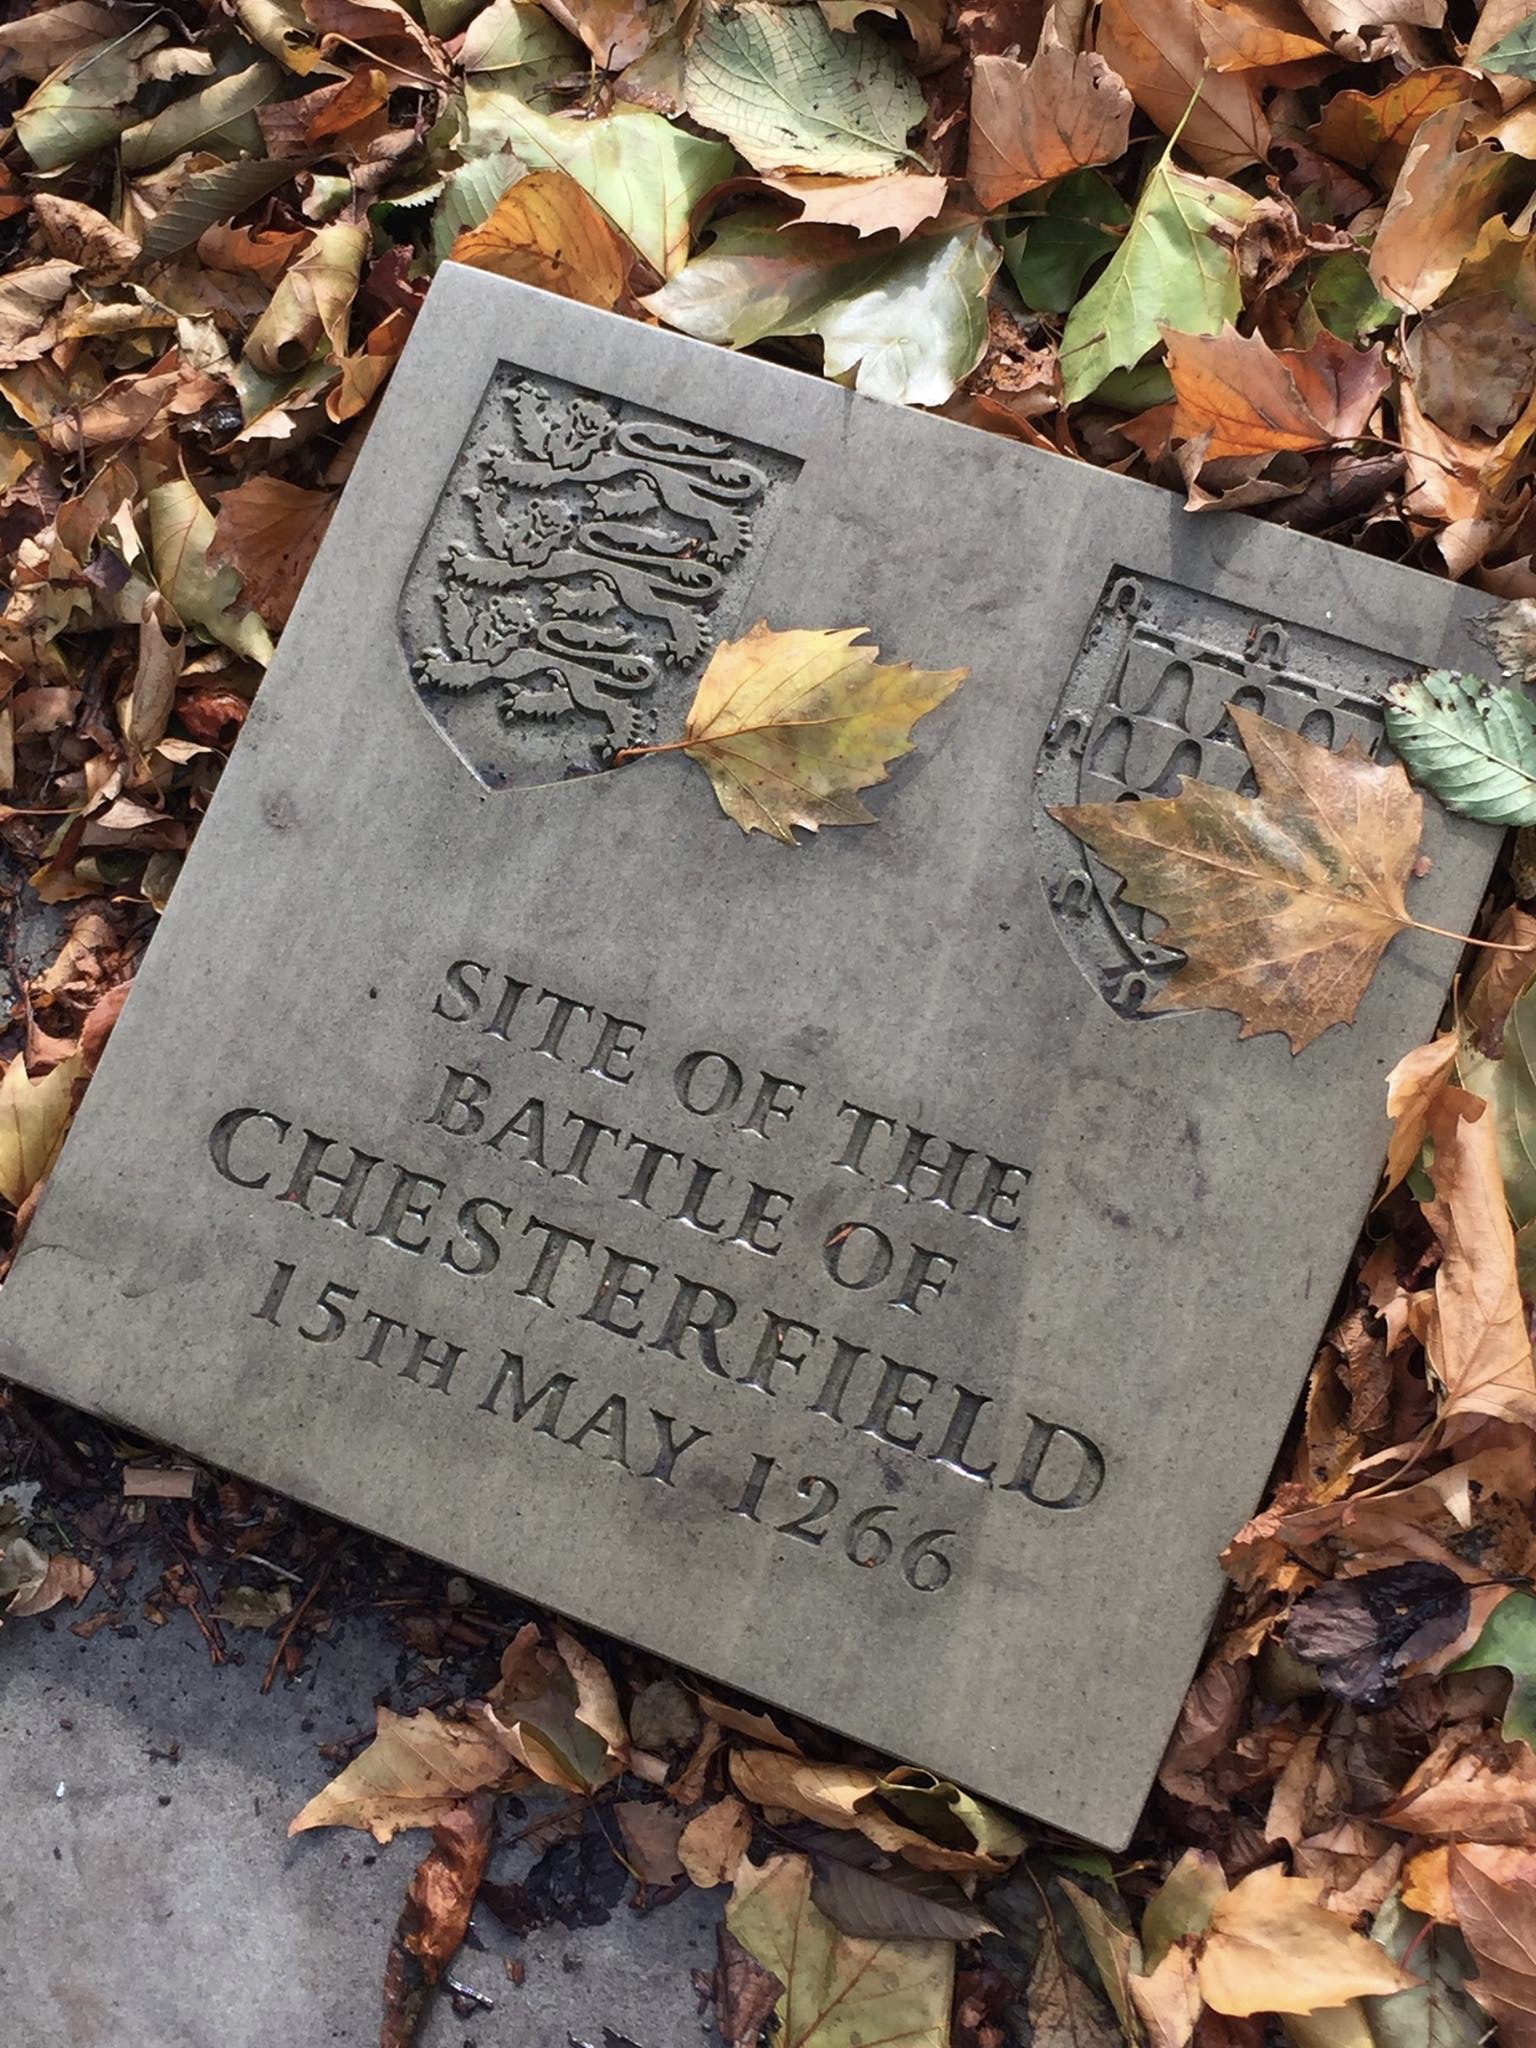 Battle of Chesterfield